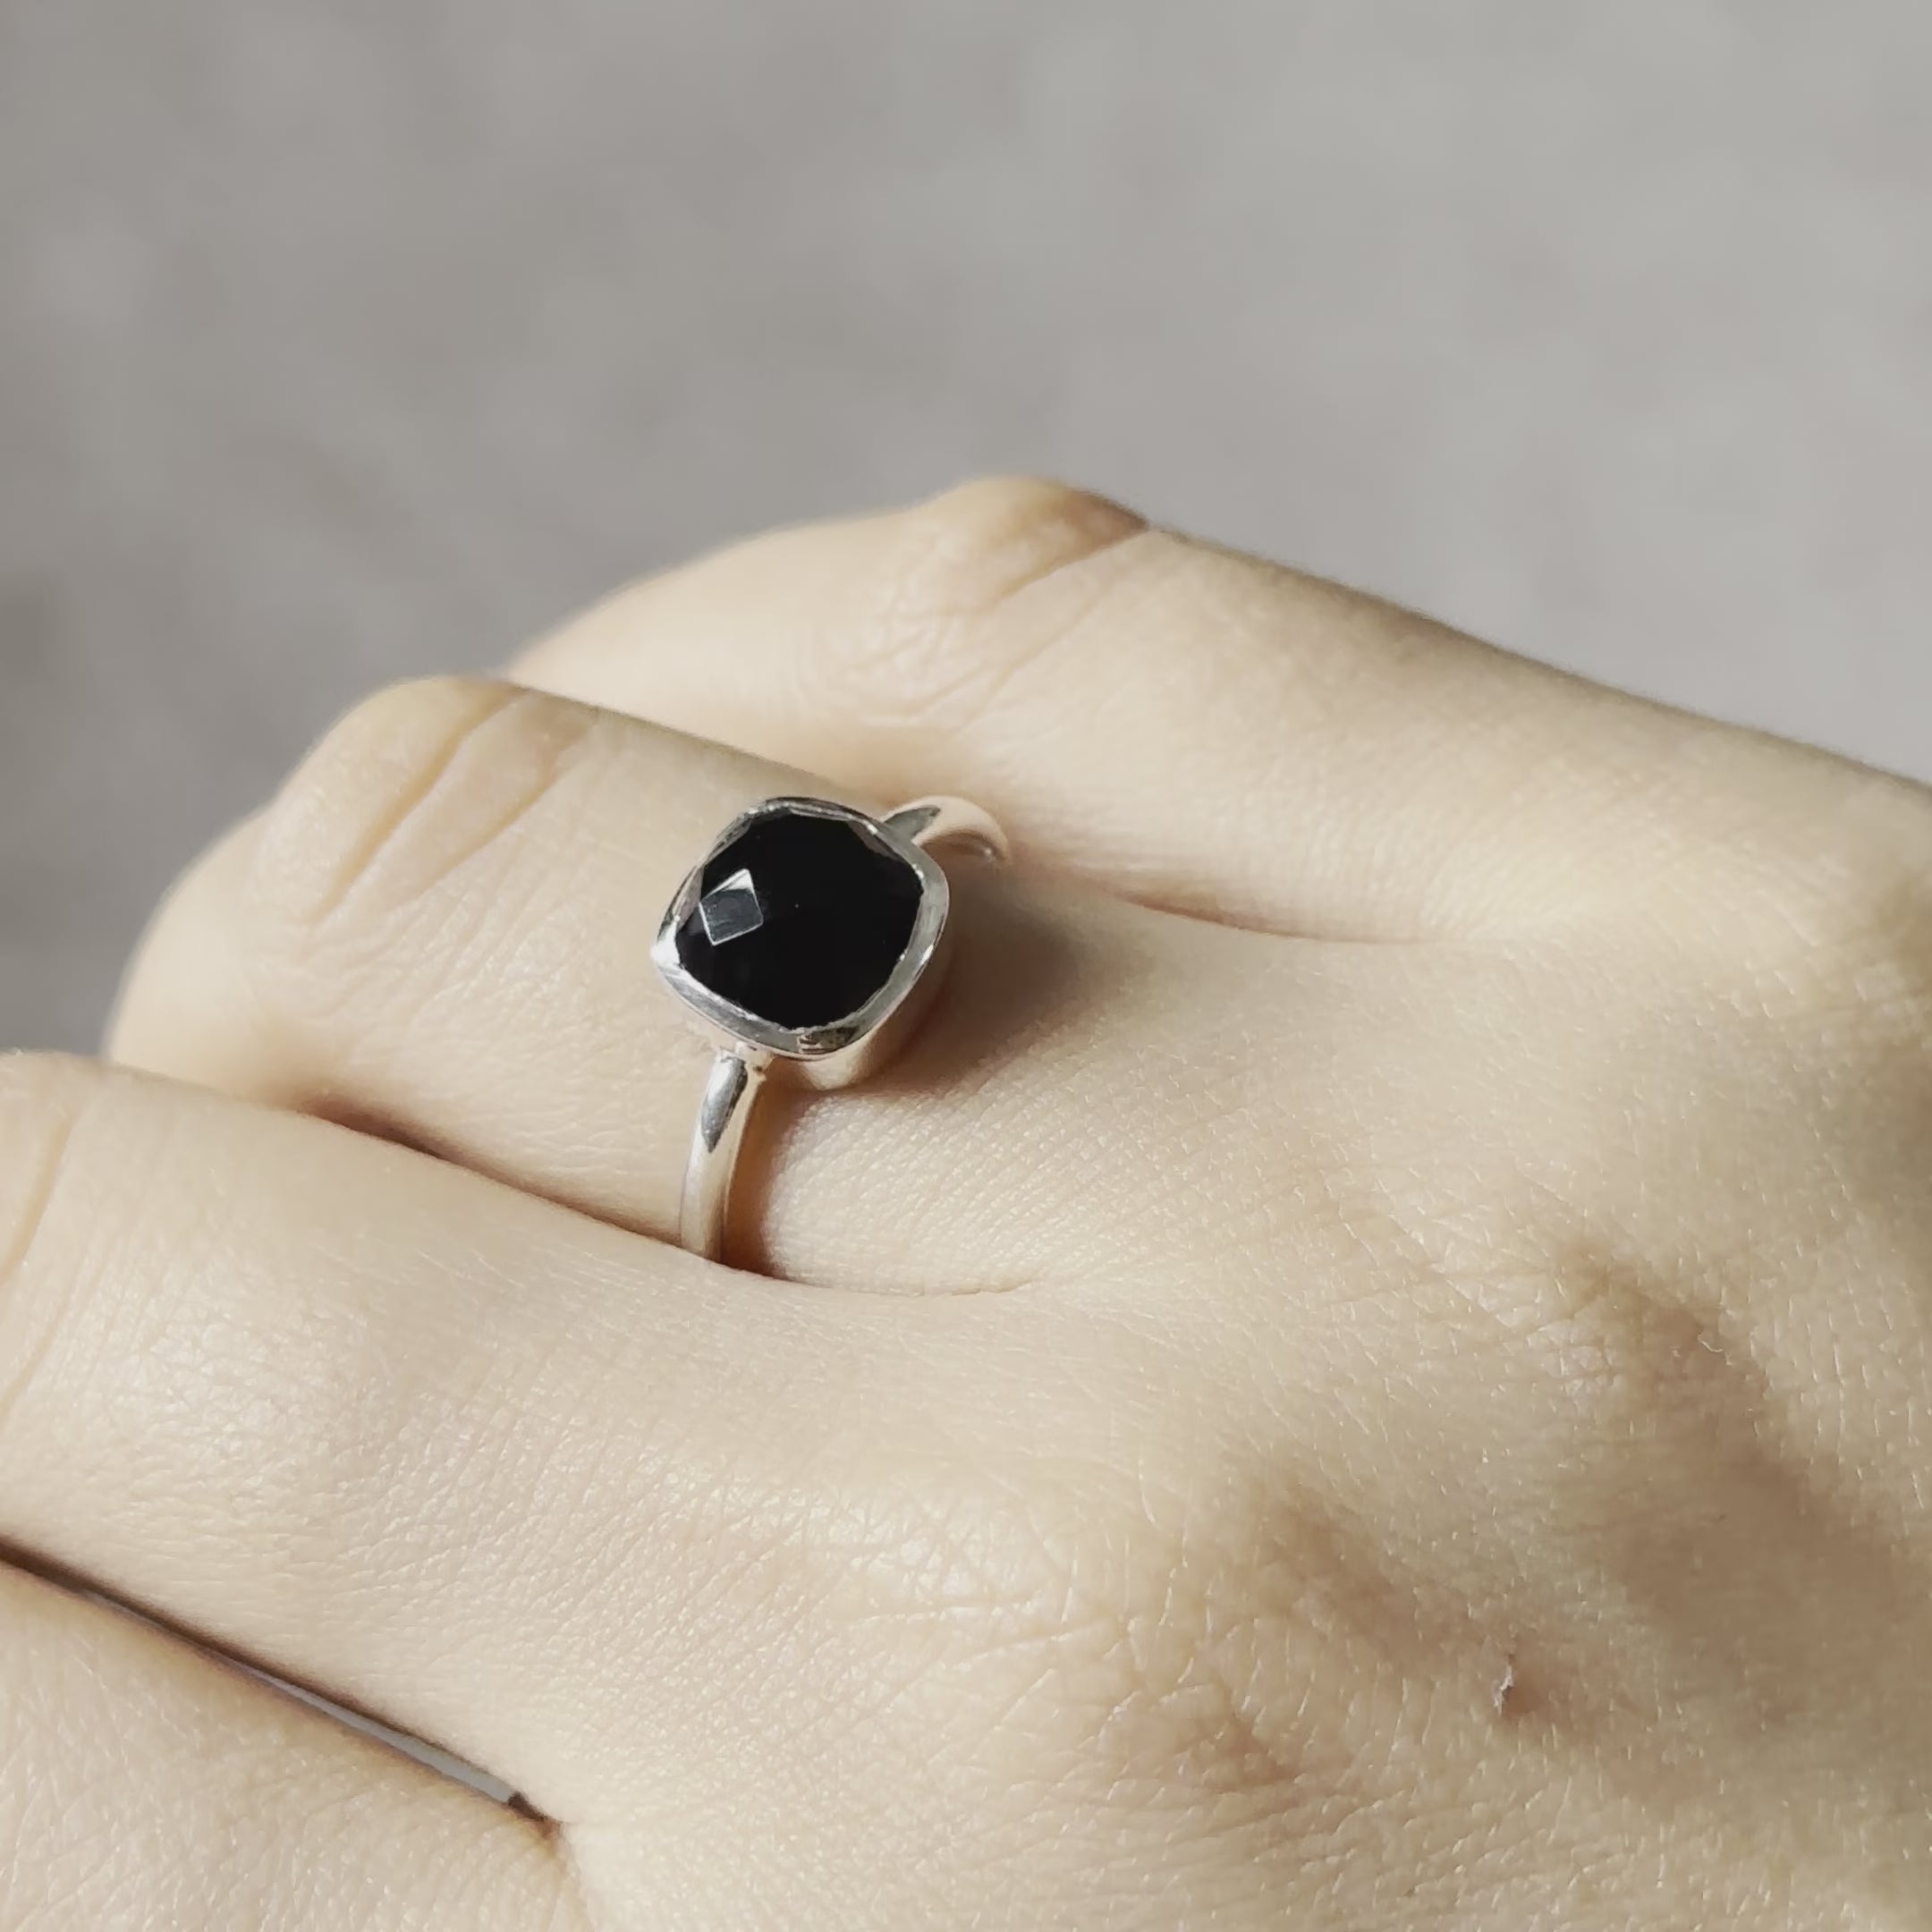 Square Cut Natural Gemstone Sterling Silver Solitaire Ring - Black Onyx